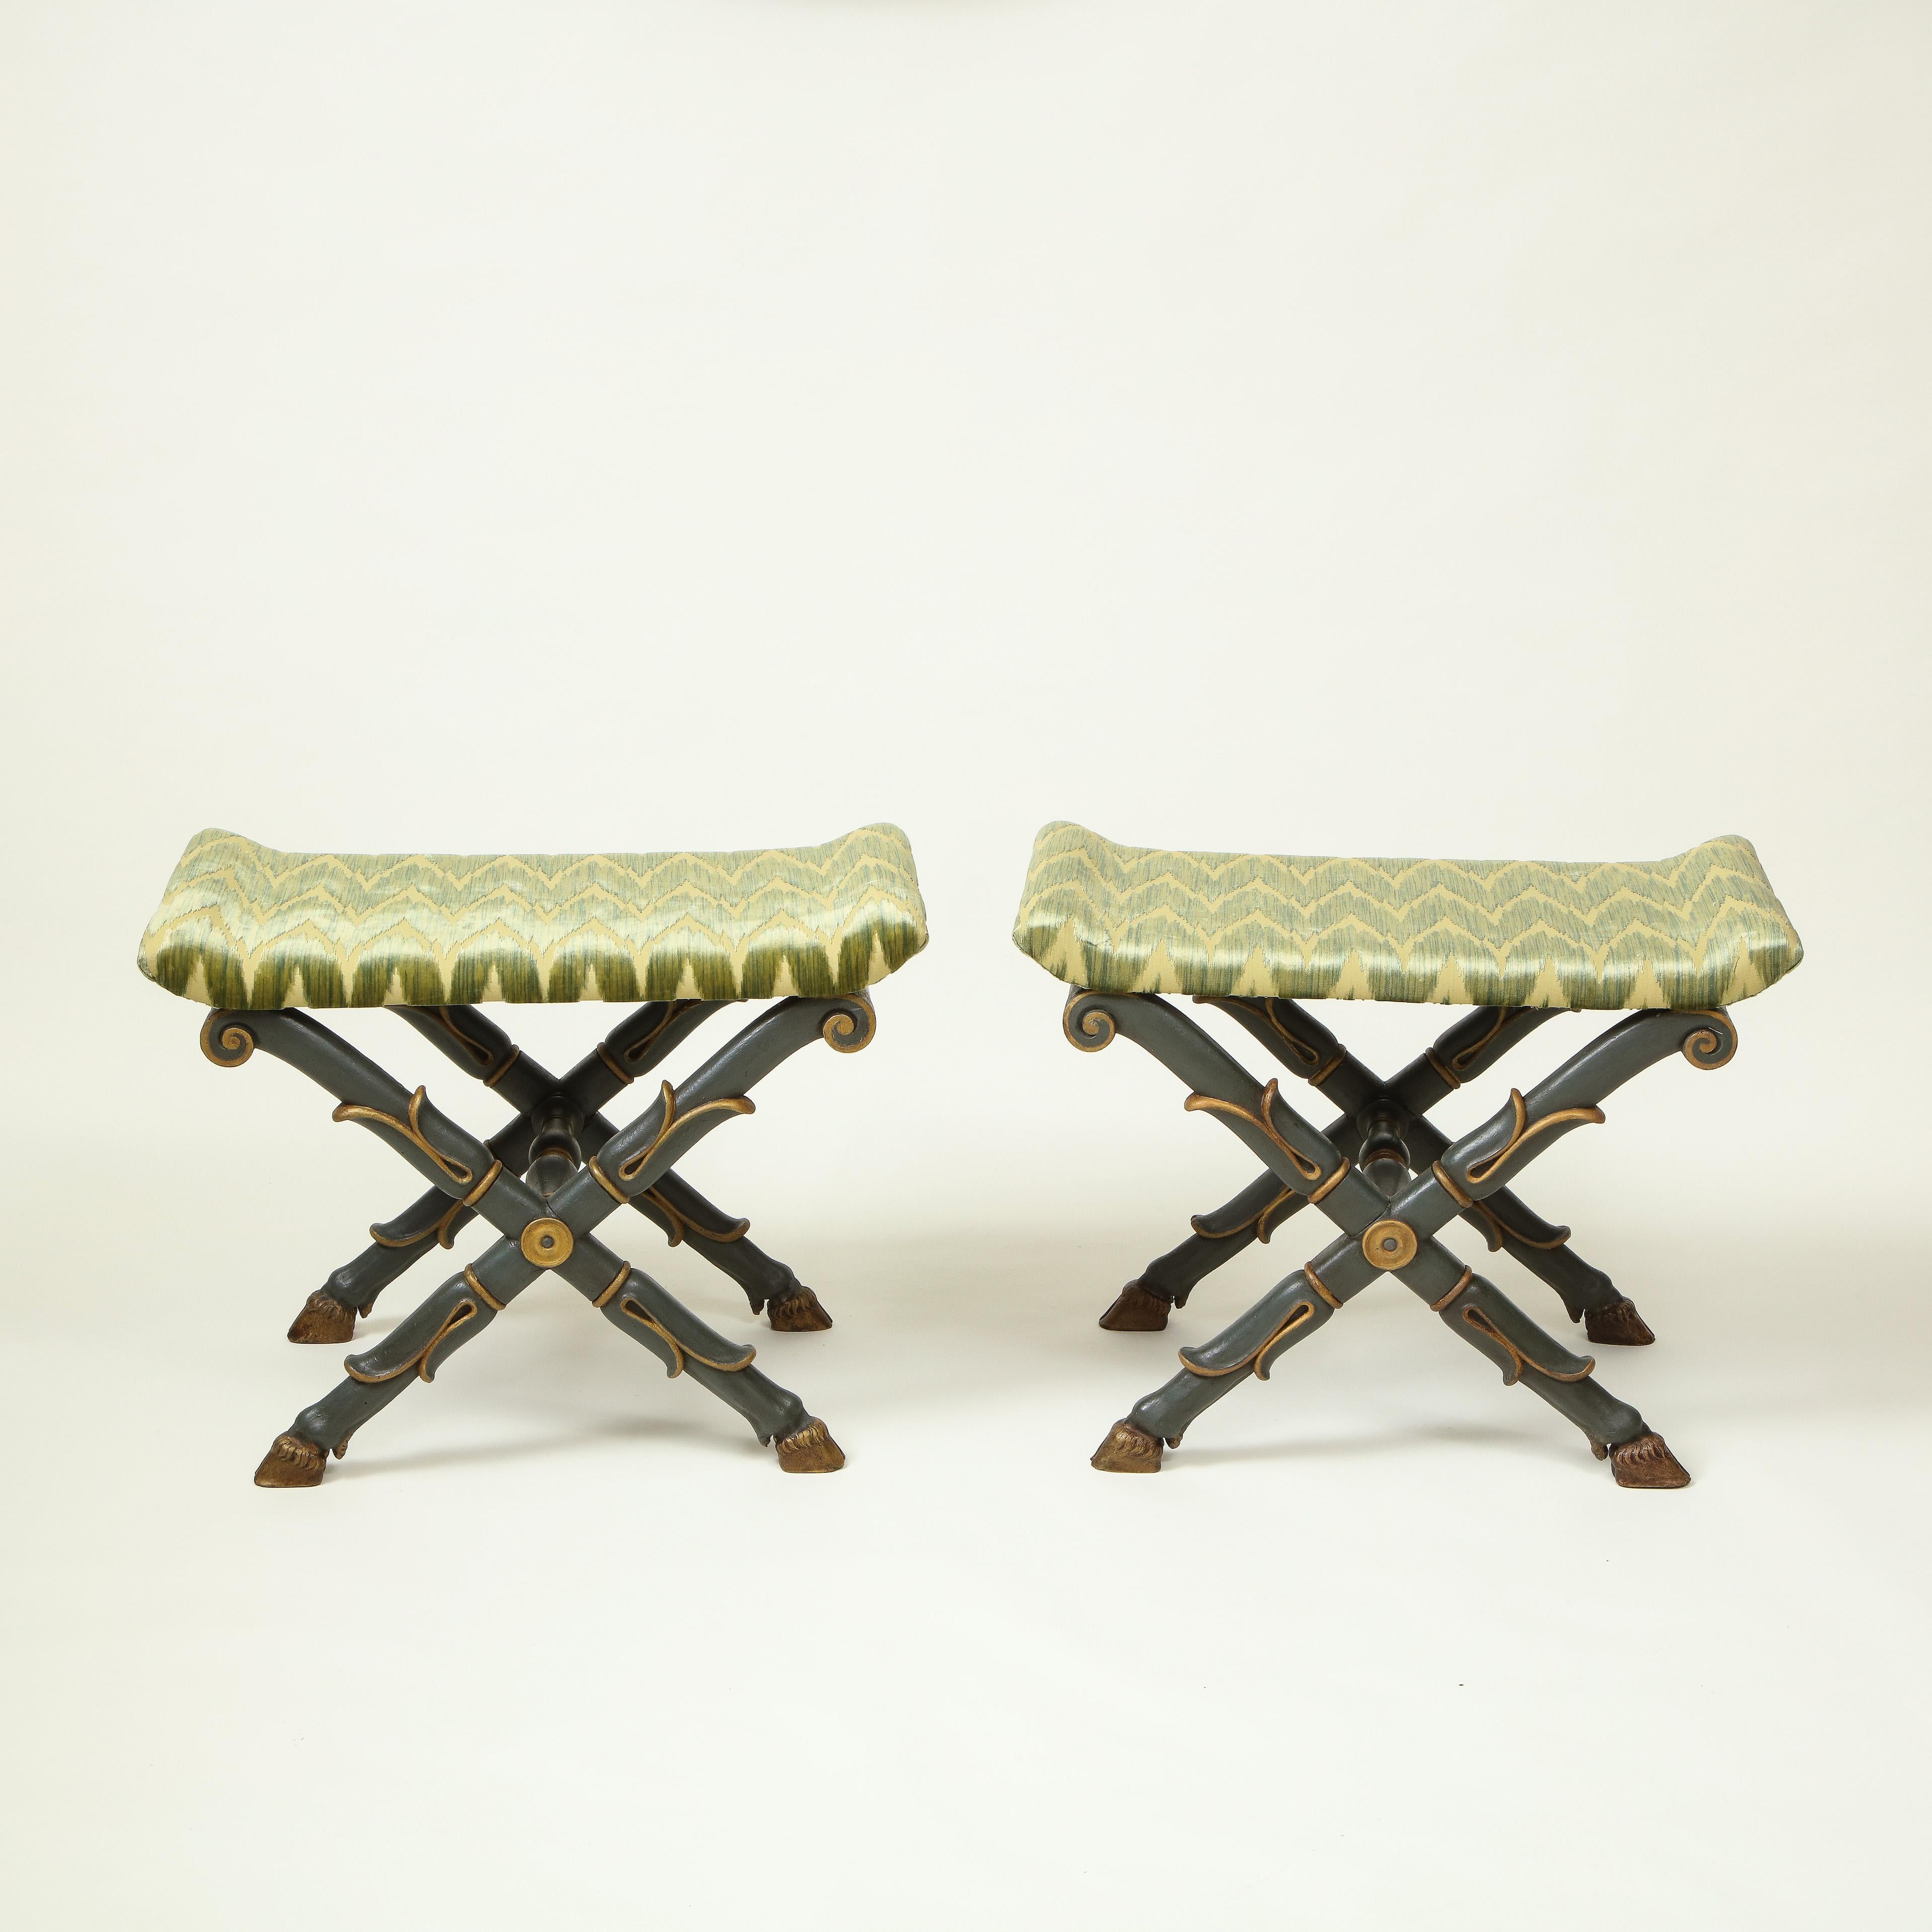 Each rectangular seat with outscrolled ends upholstered in green silk velvet; raised on bronzed and gilt lotus leaf-wrapped X-form supports joined by a turned boss and terminating in hoof feet.

Provenance: From the Collection of Mario Buatta, New